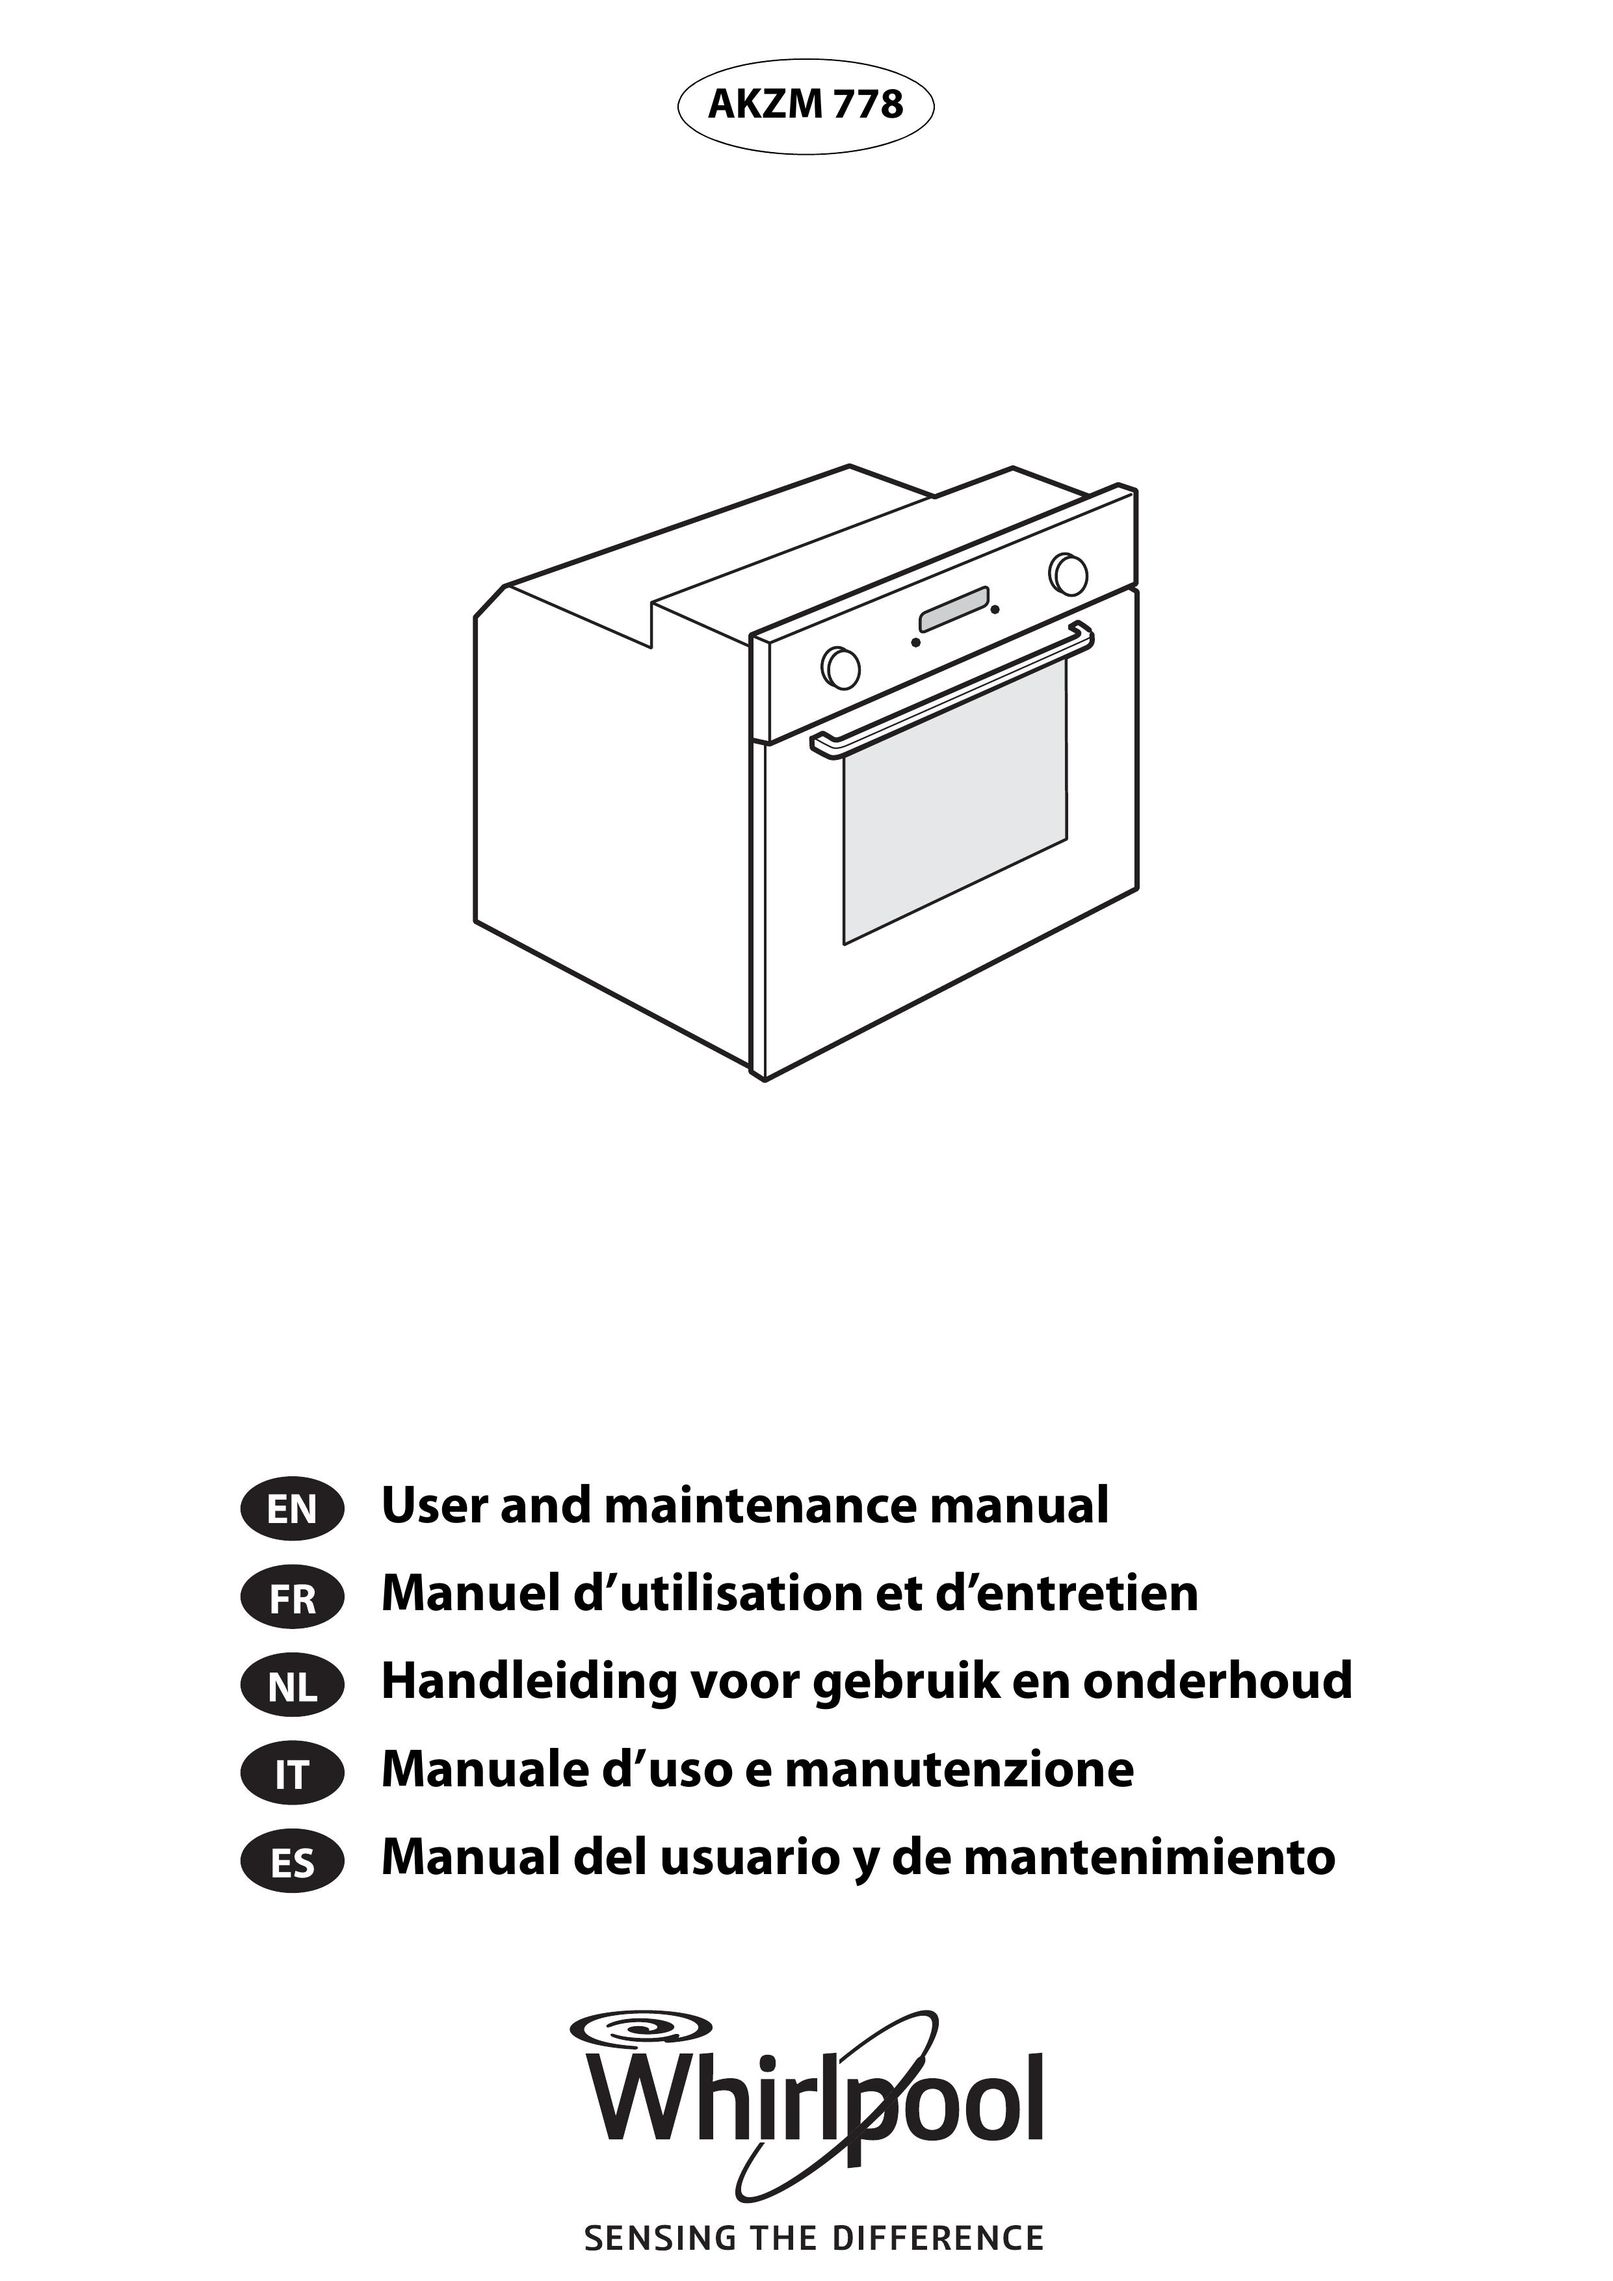 Whirlpool AKZM 778 Oven User Manual